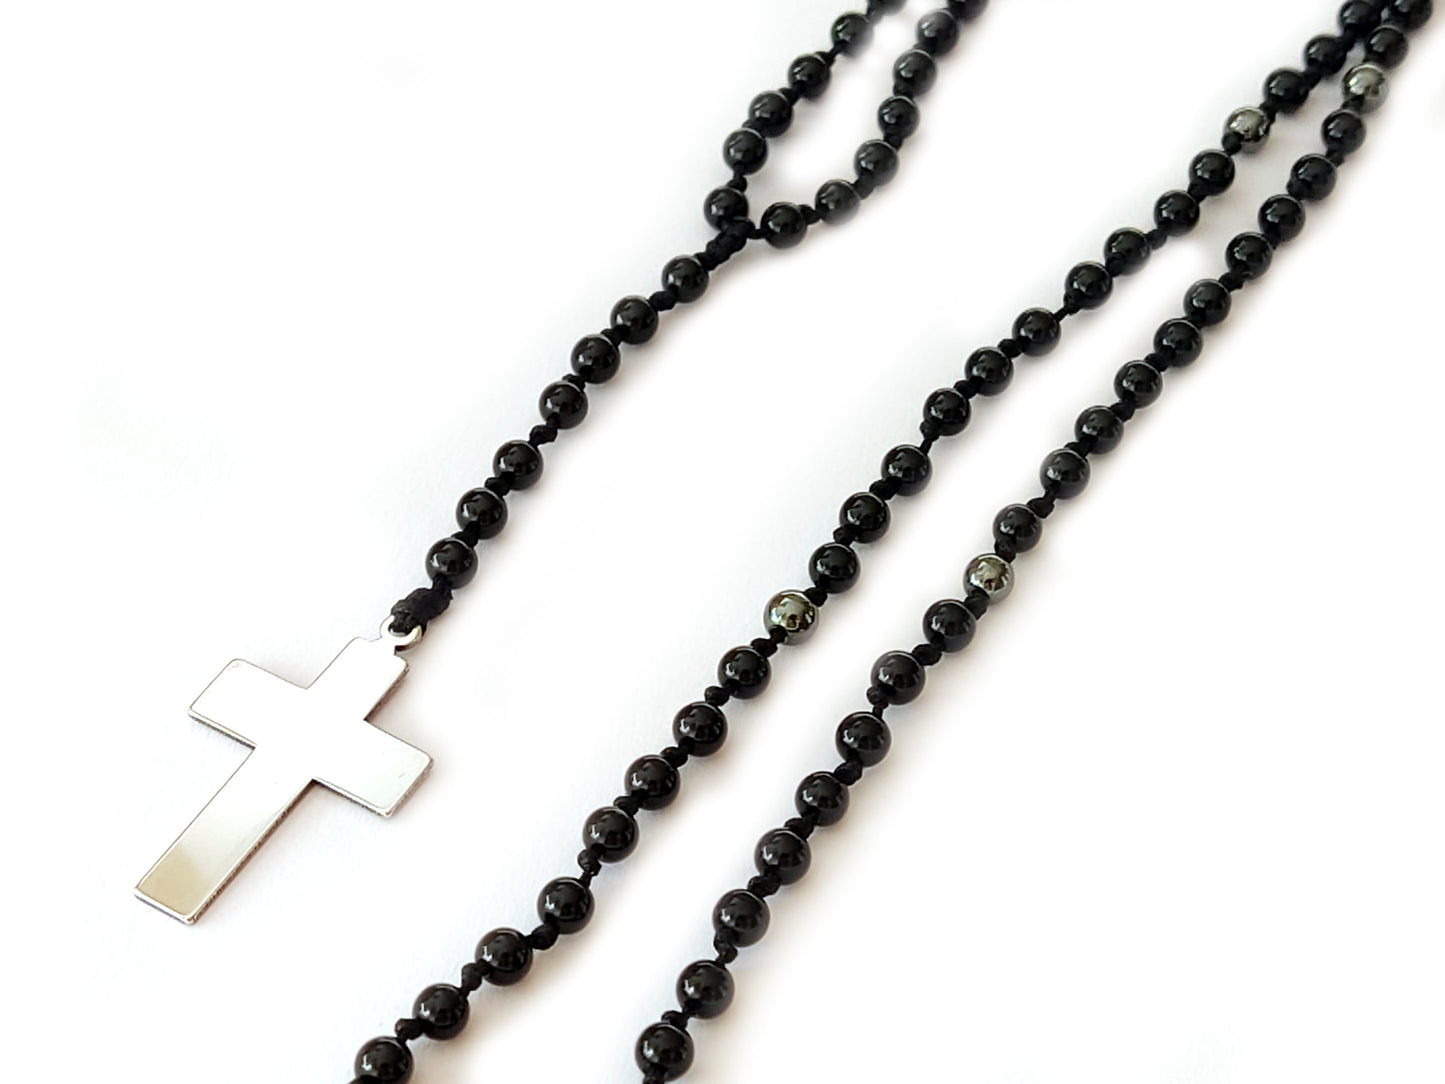 Sleek black onyx beads elegantly arranged in a rosary-style necklace, featuring a meticulously crafted cross pendant, showcasing artisanal excellence.